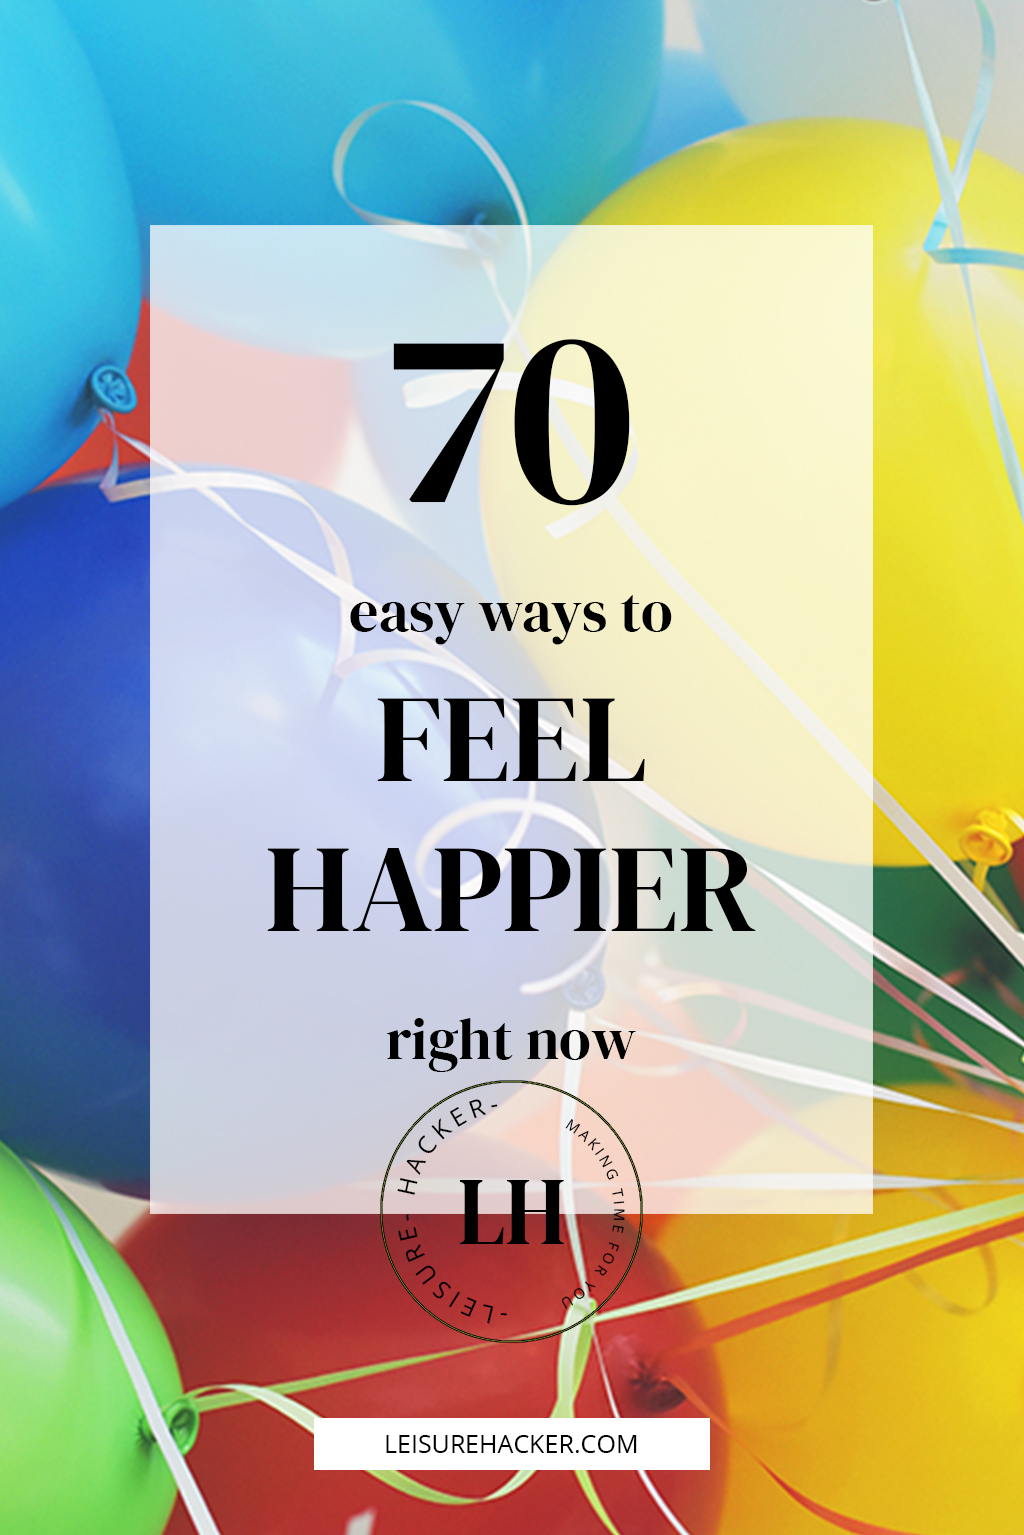 70 easy ways to feel happier right now